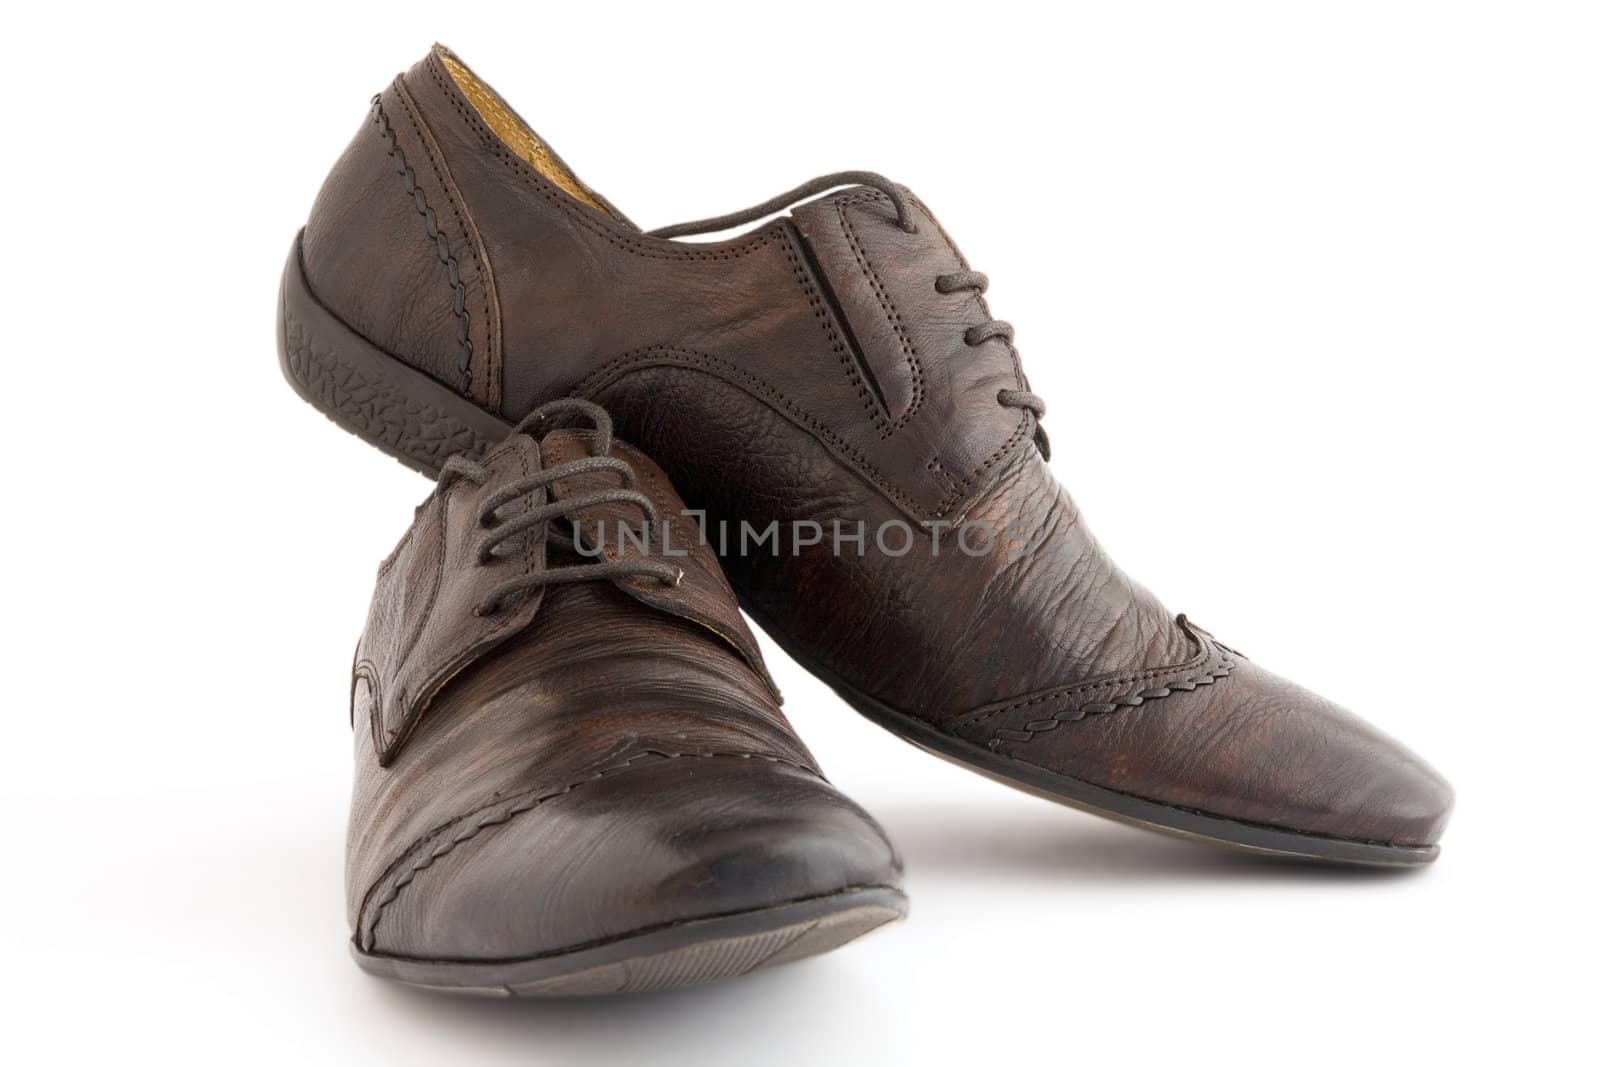 luxury leather man's shoes on a white background